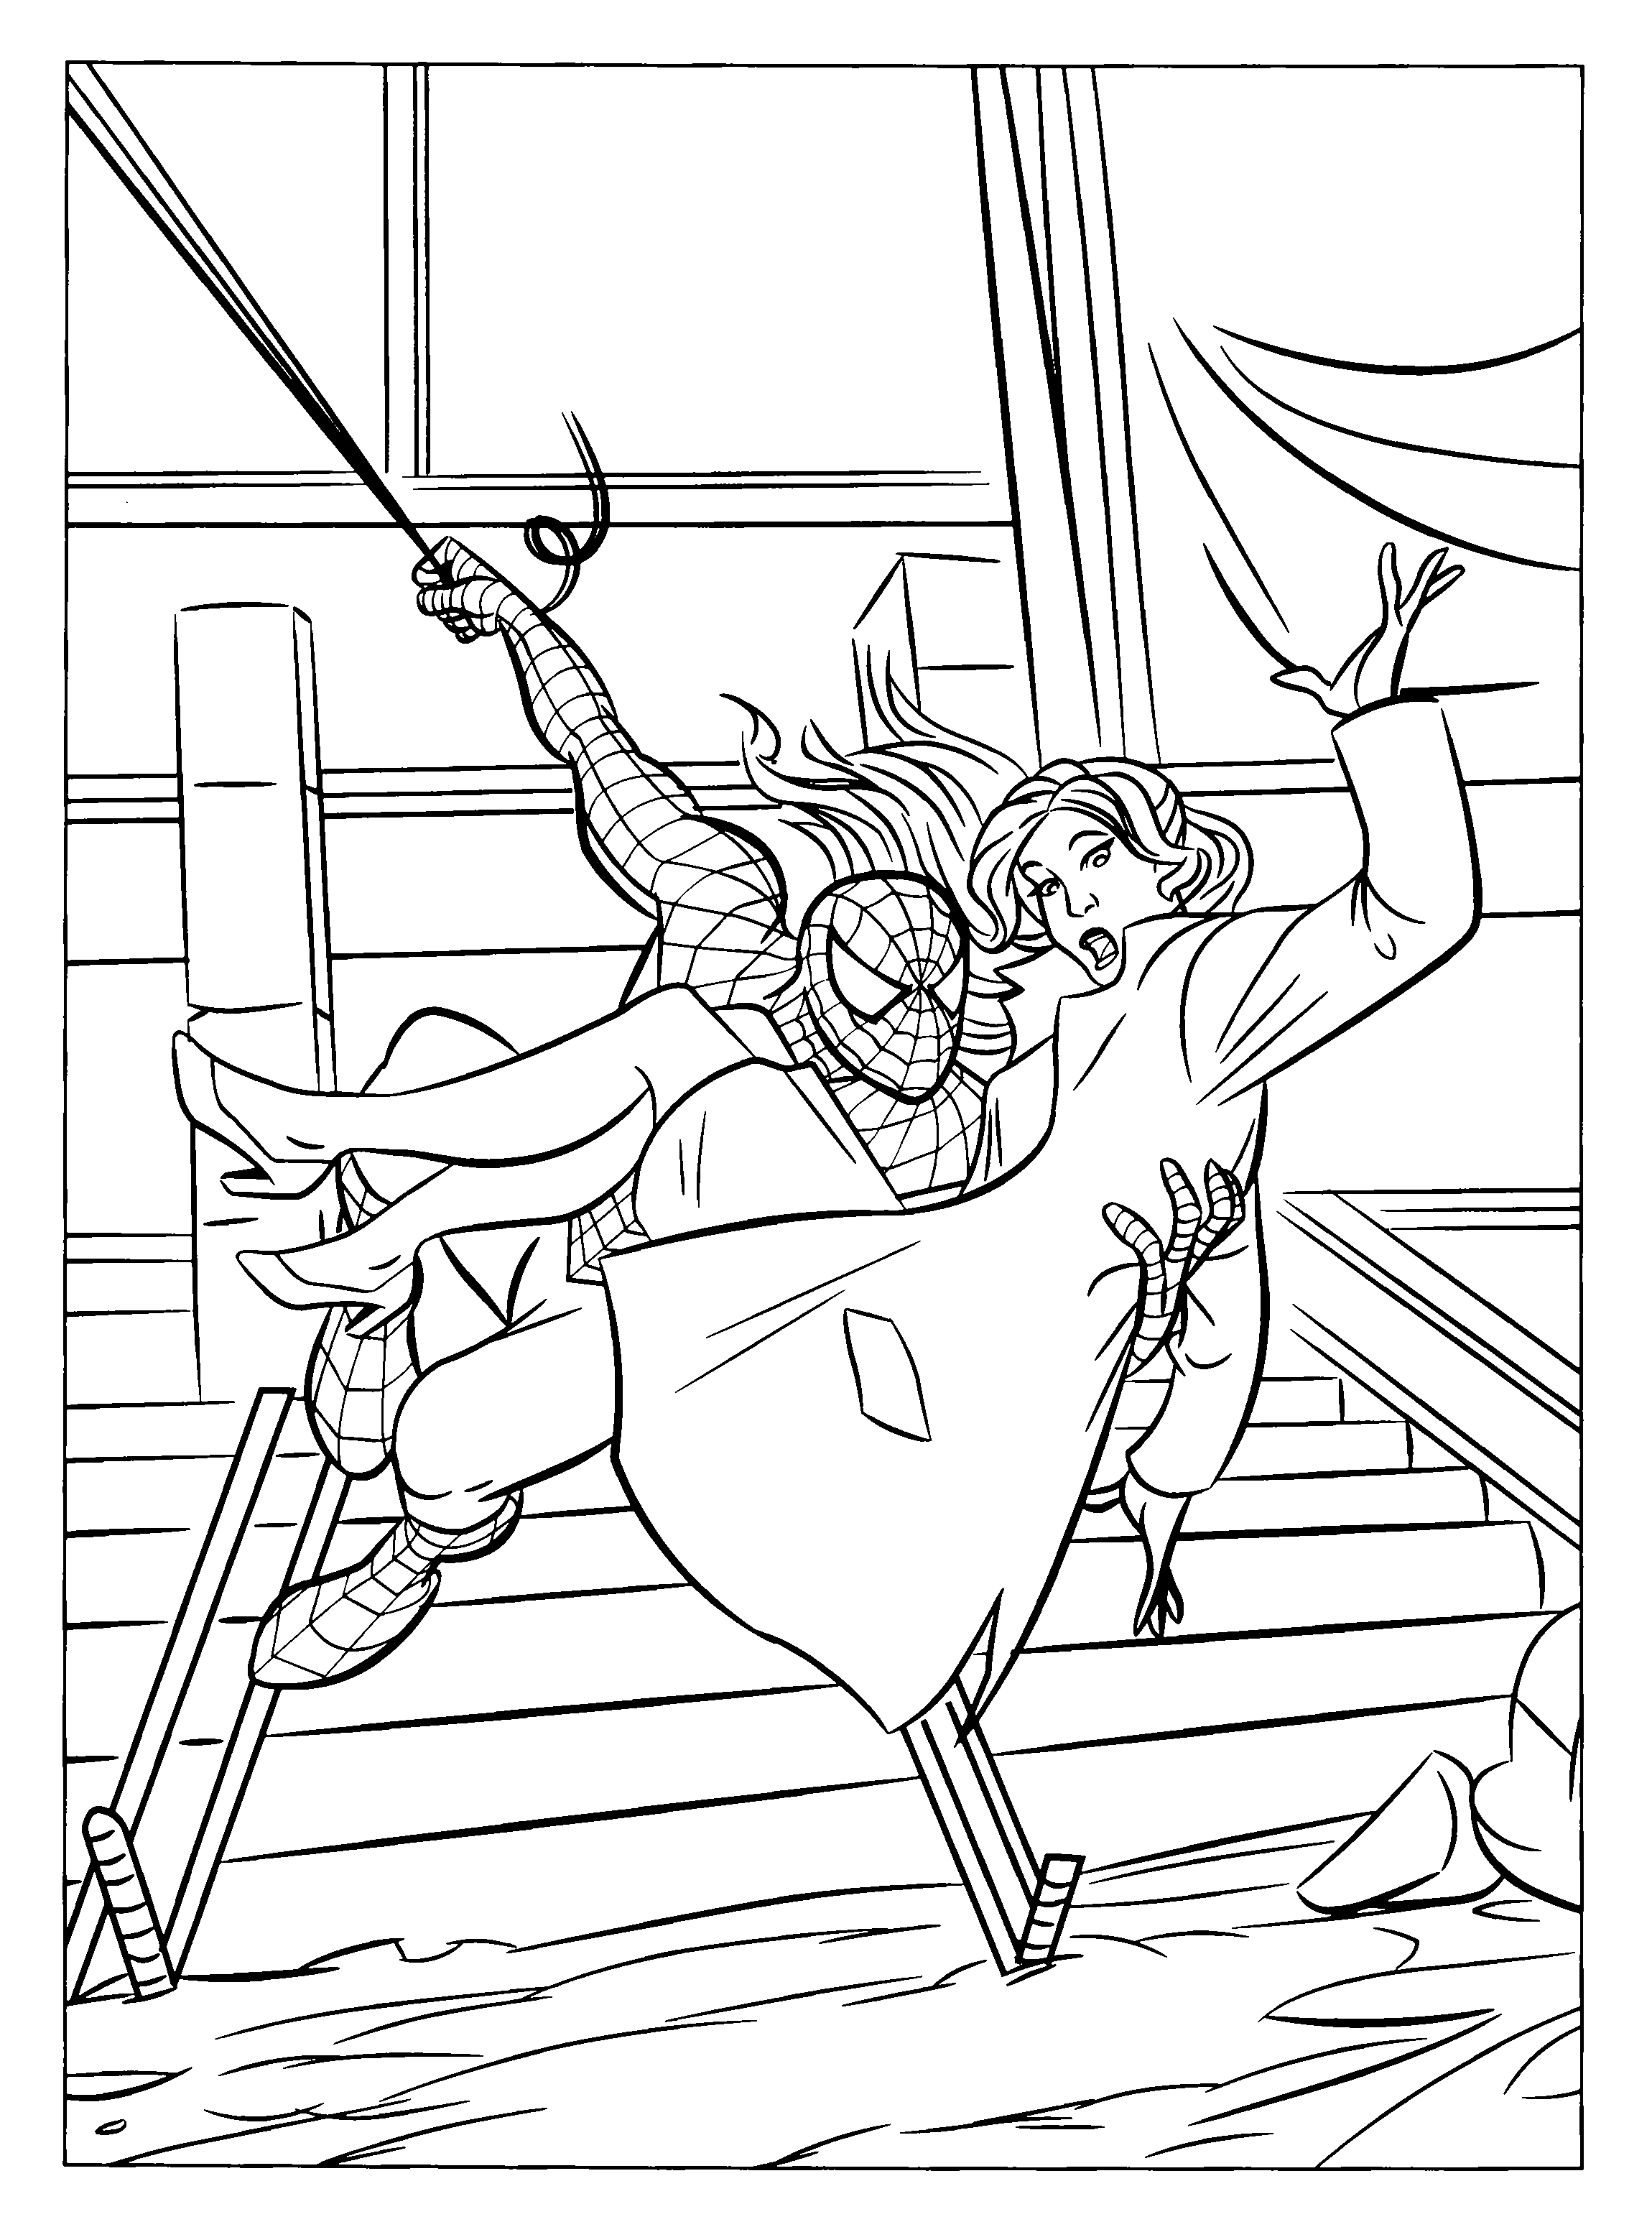 Spiderman Coloring pages | Coloring page | FREE Coloring pages for kids | #16